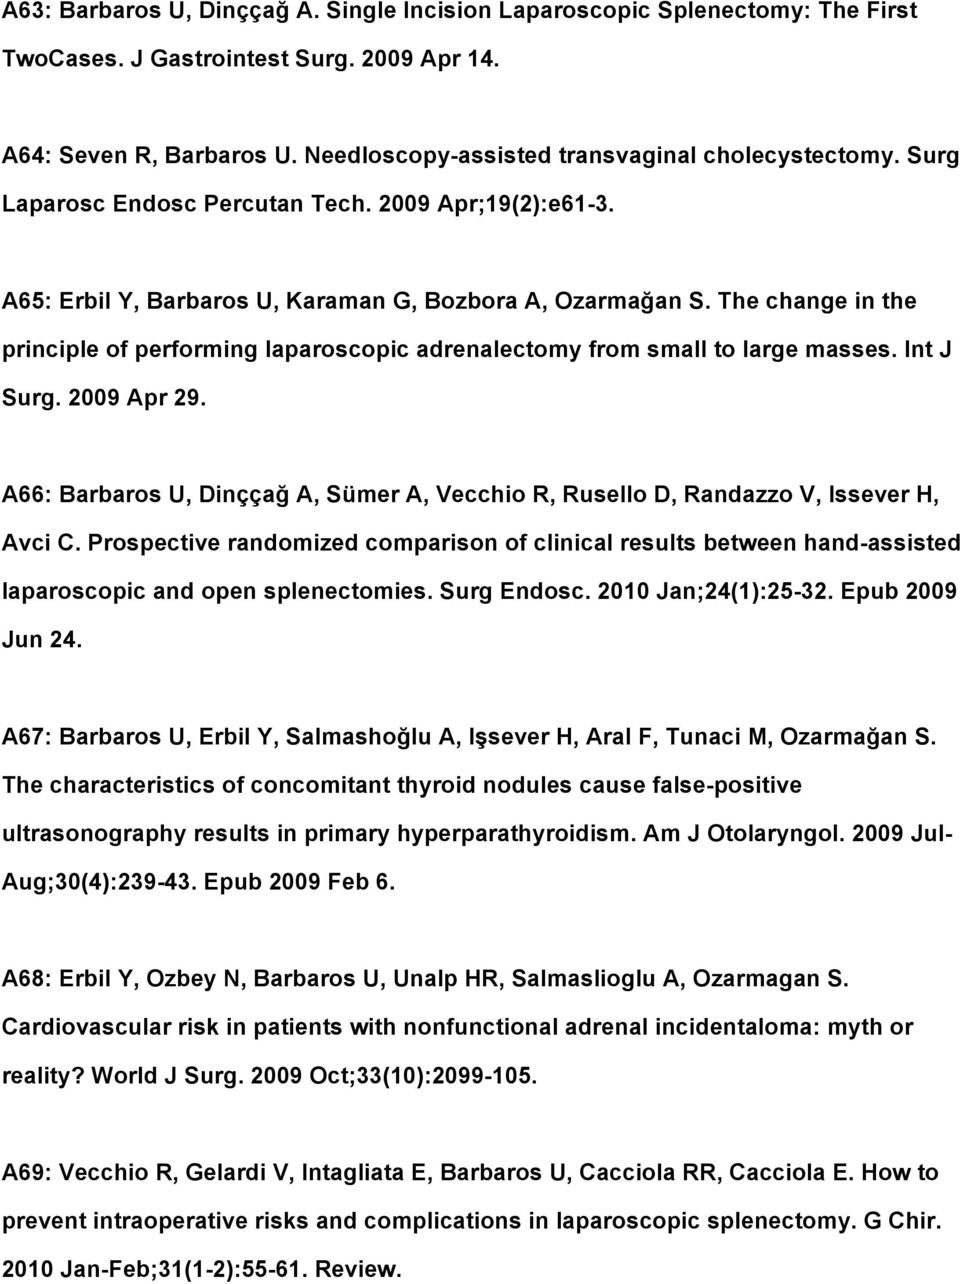 The change in the principle of performing laparoscopic adrenalectomy from small to large masses. Int J Surg. 2009 Apr 29.